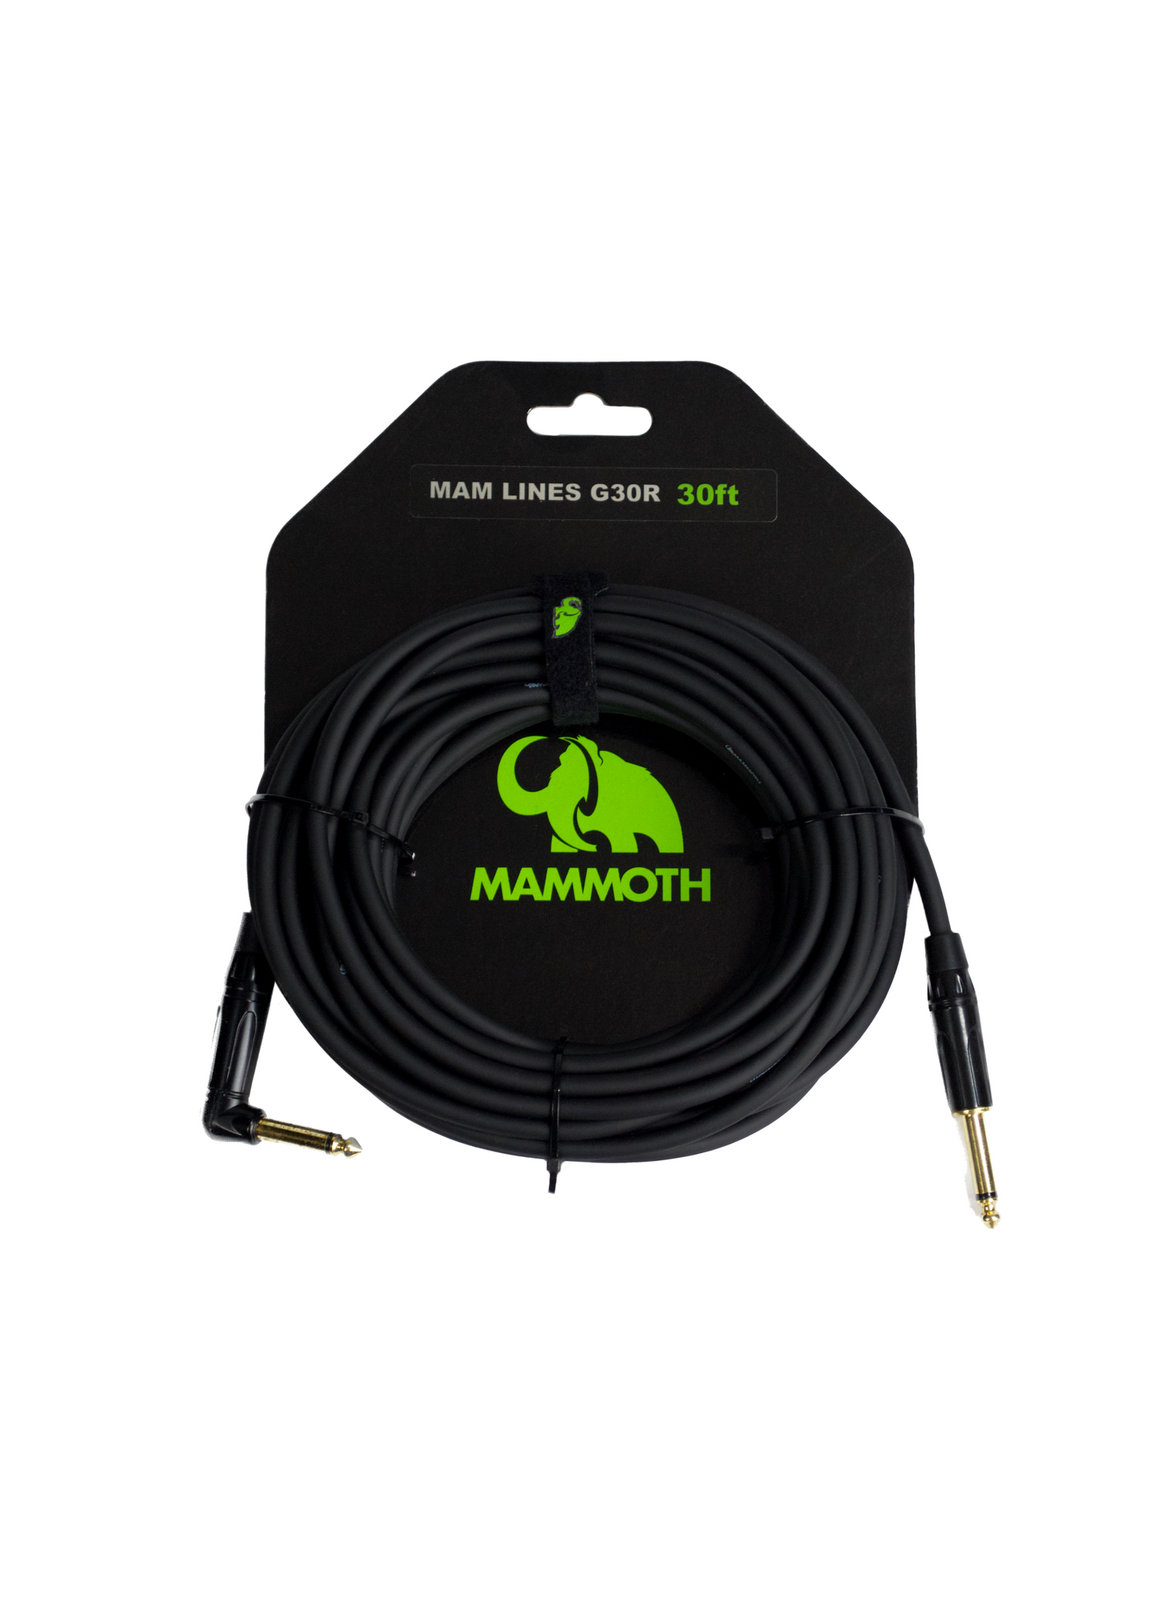 Mammoth Lines G30R 30ft Instrument Cable Right Angle Jack to Straight Jack